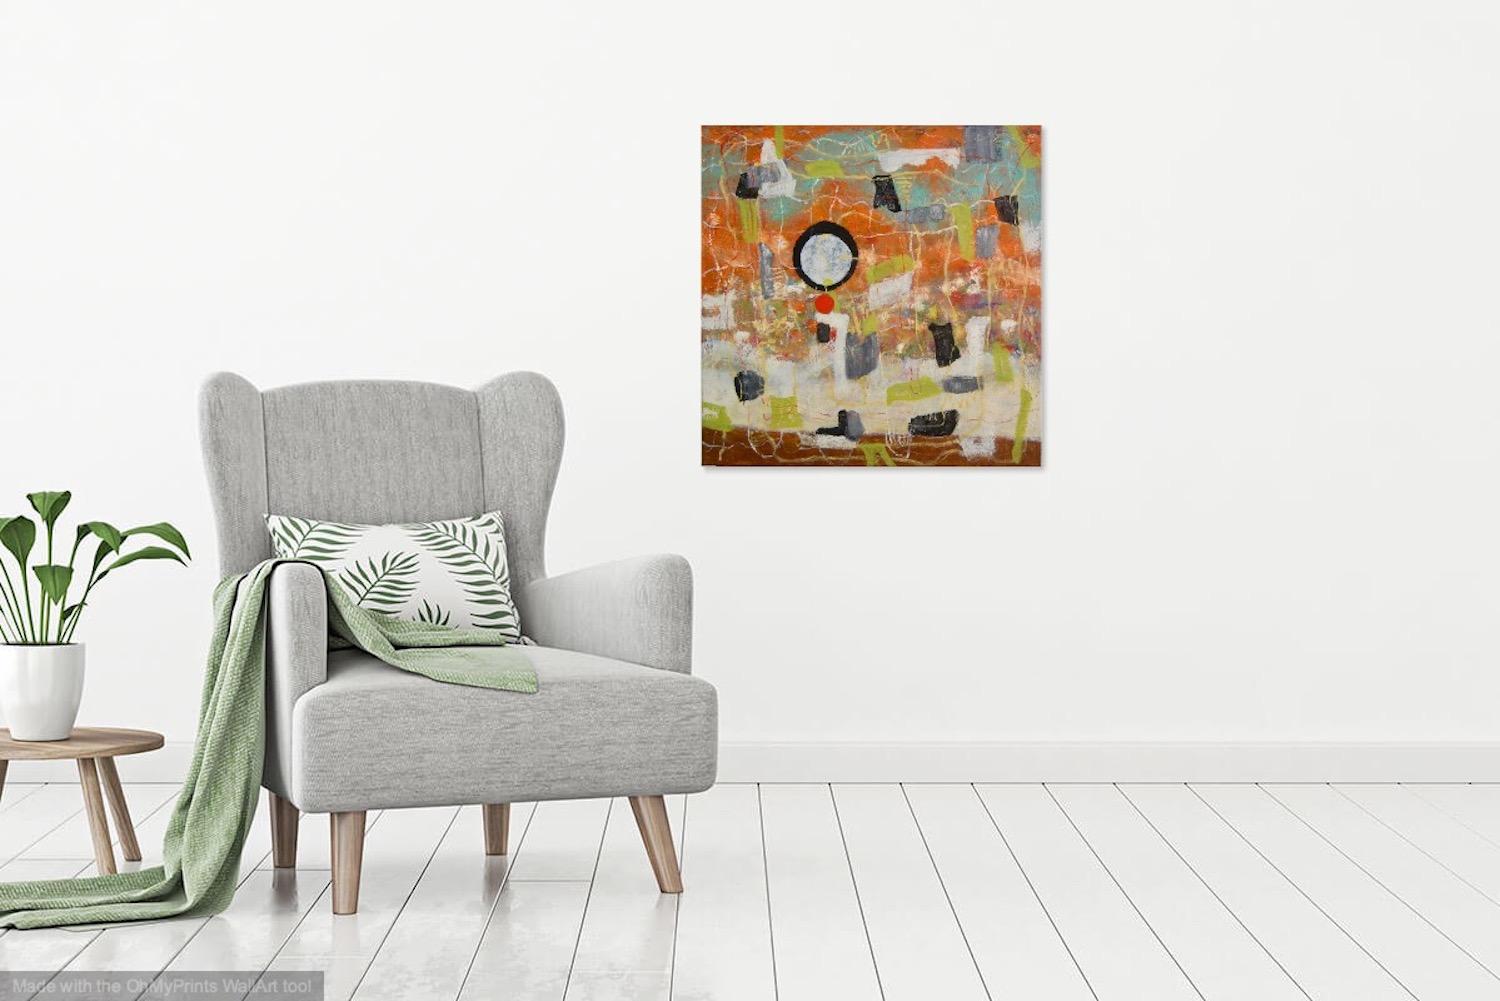 Musings: Whimsical Zen Circle Abstract Oil Painting - Bright and Cheerful Orange Artwork - Contemporary Art Decor for Home and Office 